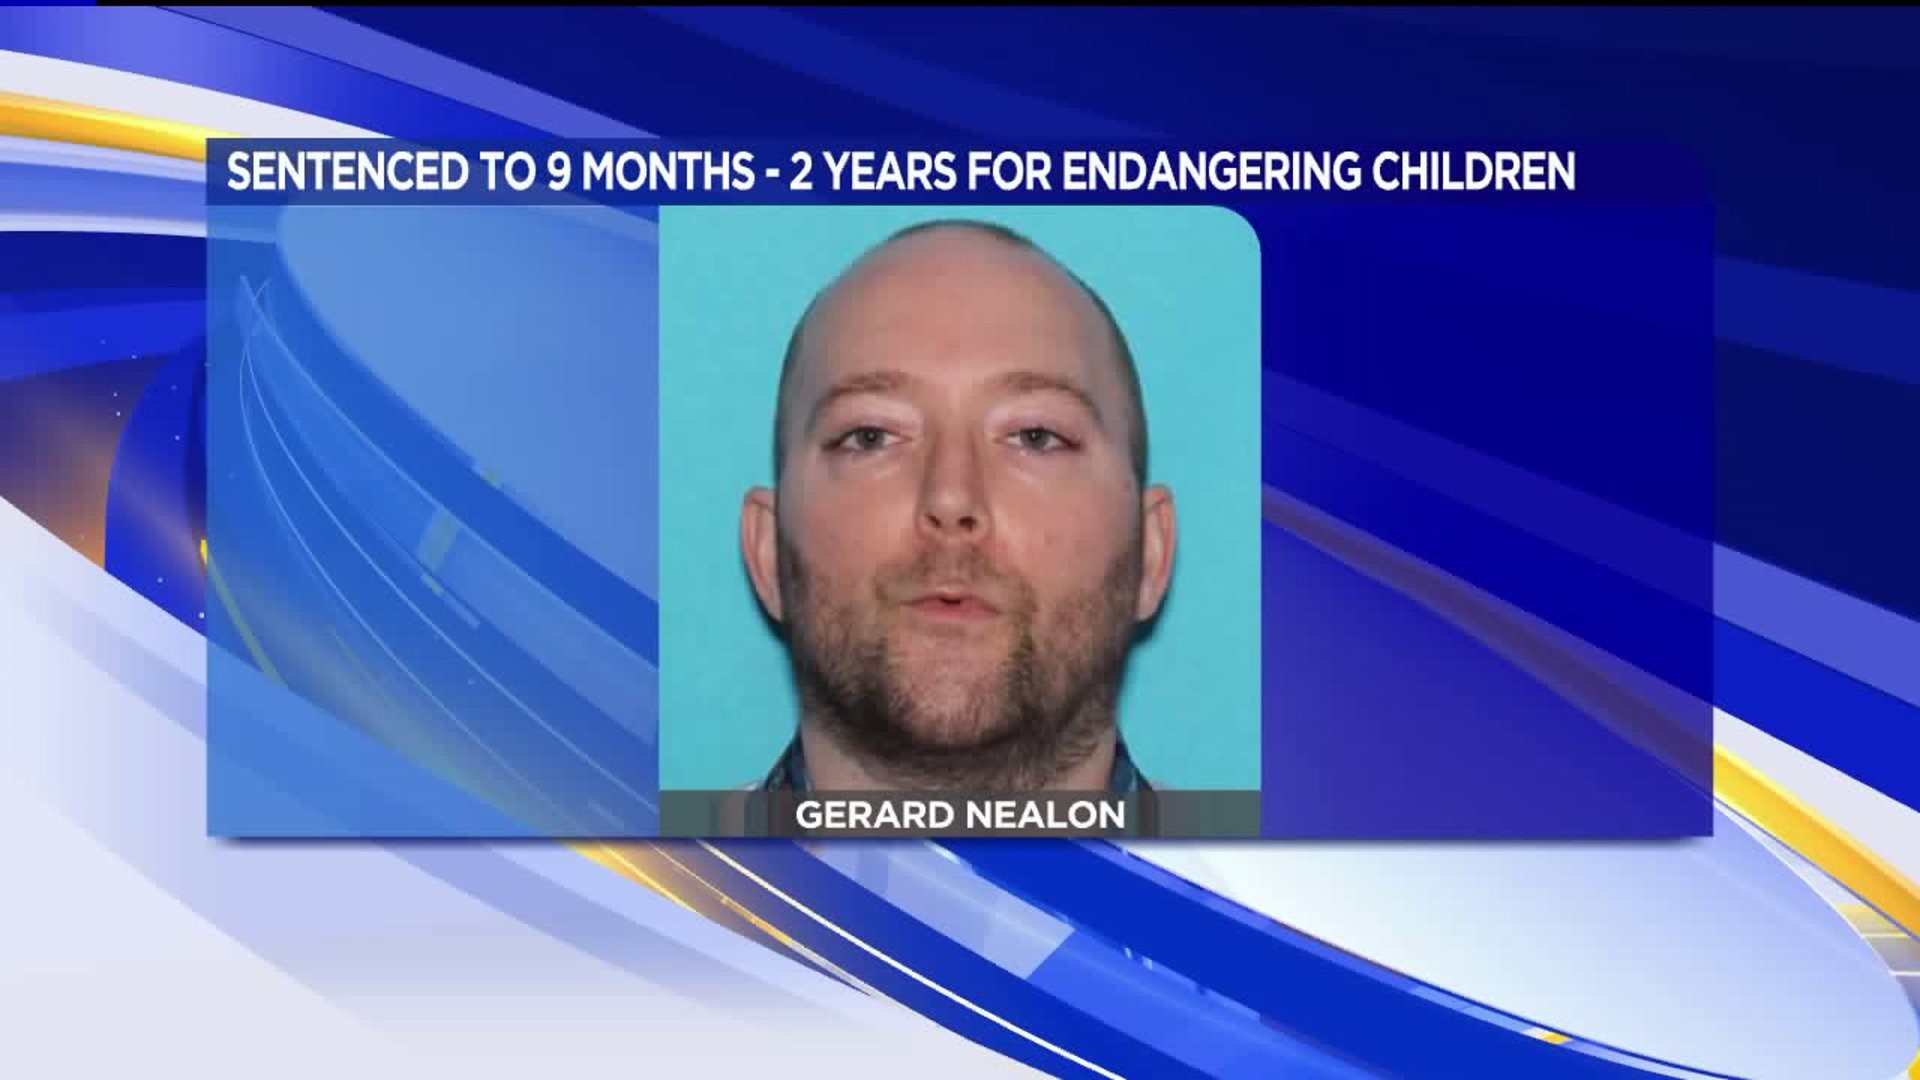 Father Sent to Prison for Child Endangerment